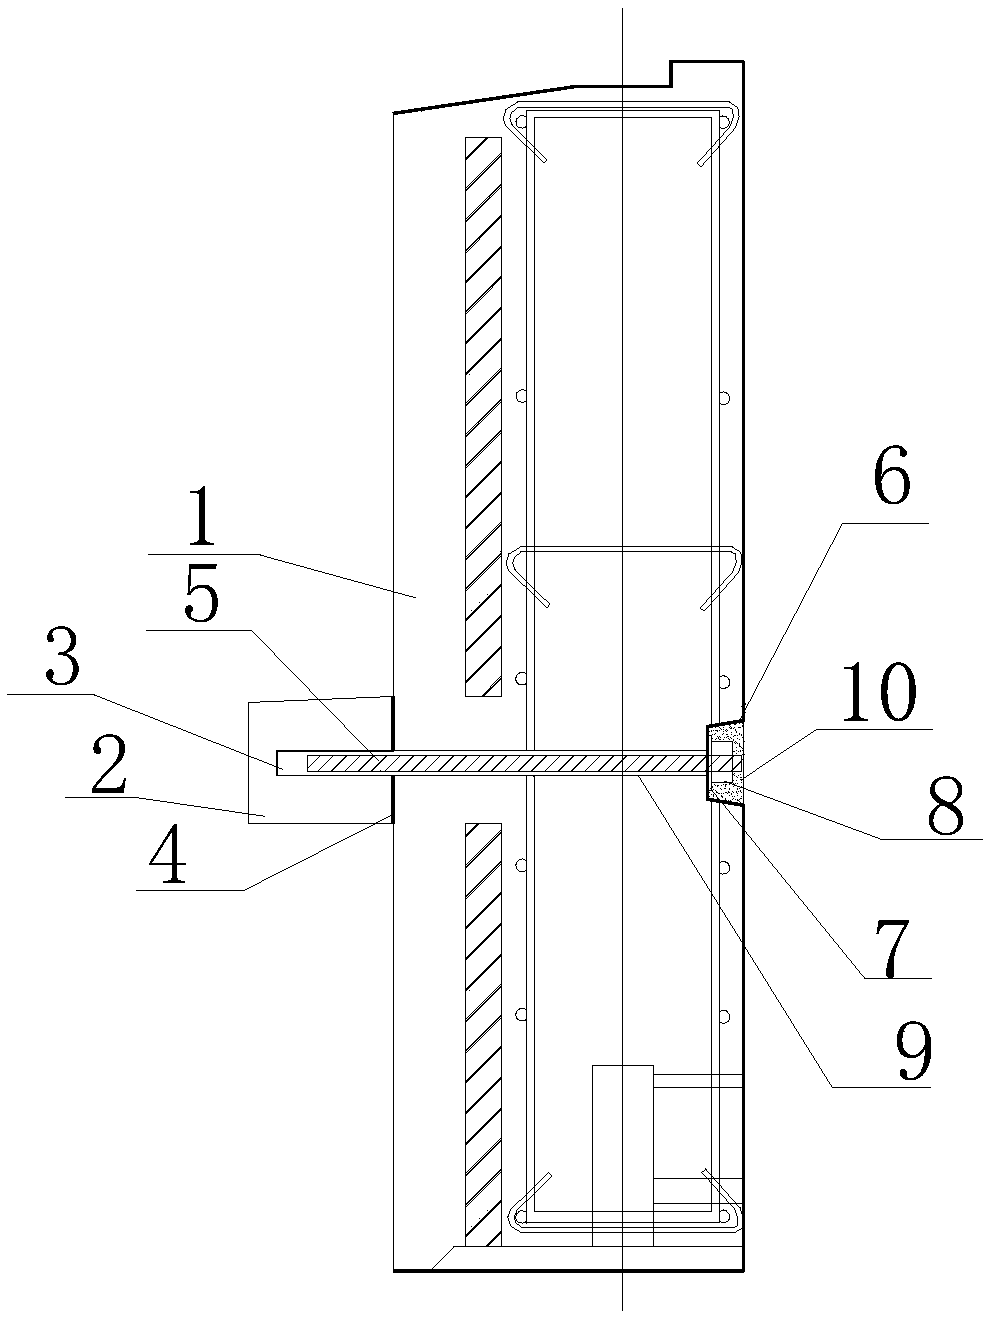 Method for installing prefabricated line of external wall of fabricated structure PC member